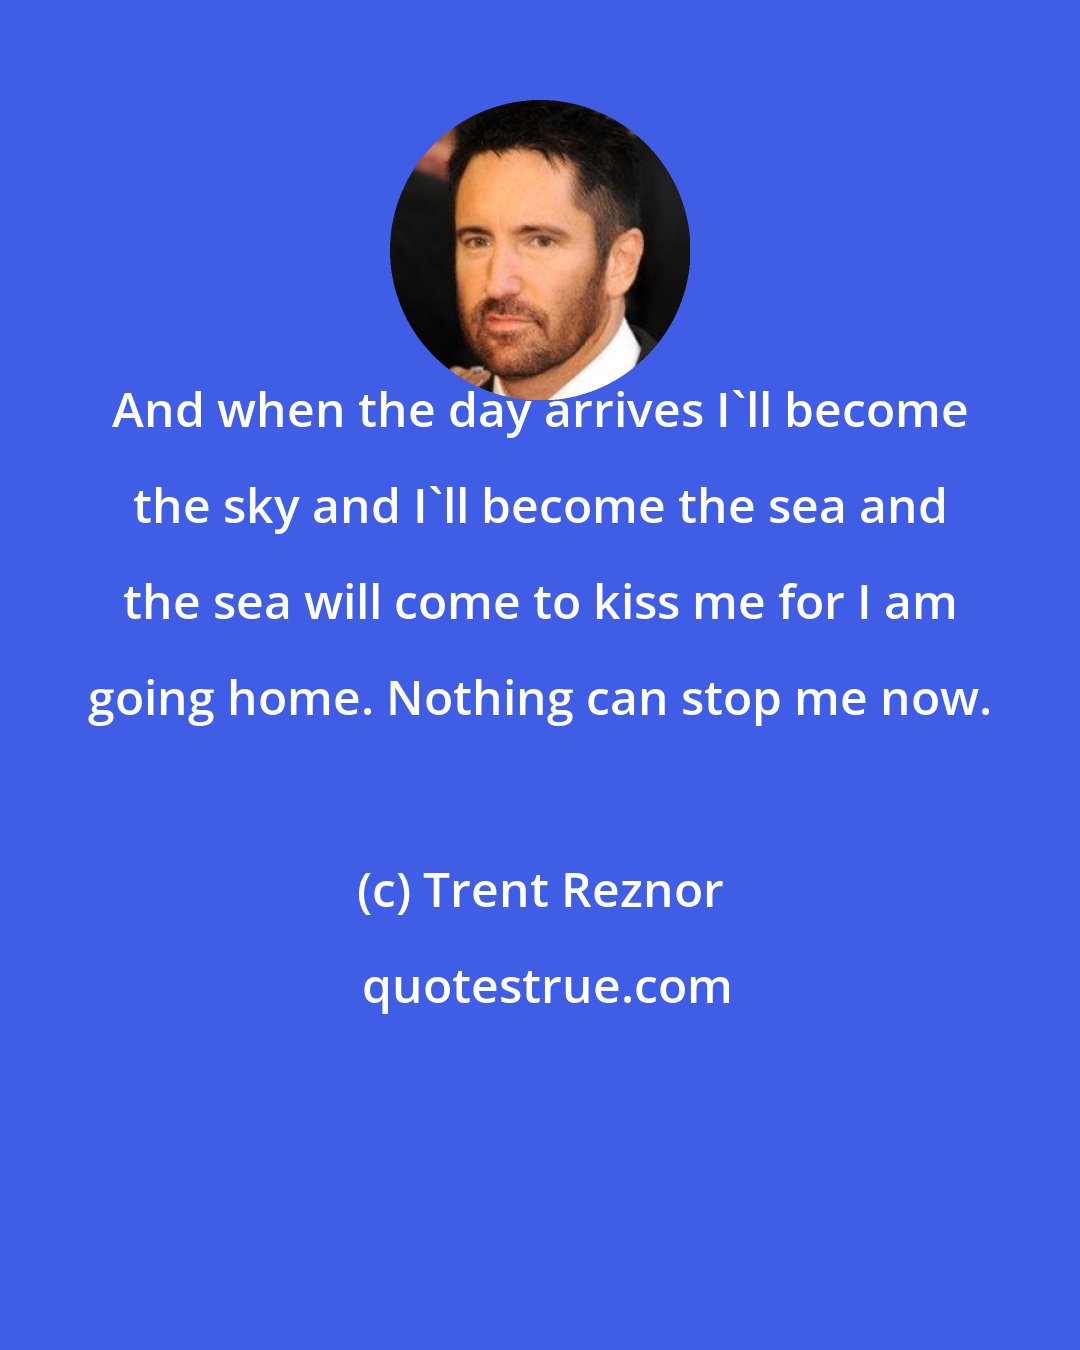 Trent Reznor: And when the day arrives I'll become the sky and I'll become the sea and the sea will come to kiss me for I am going home. Nothing can stop me now.